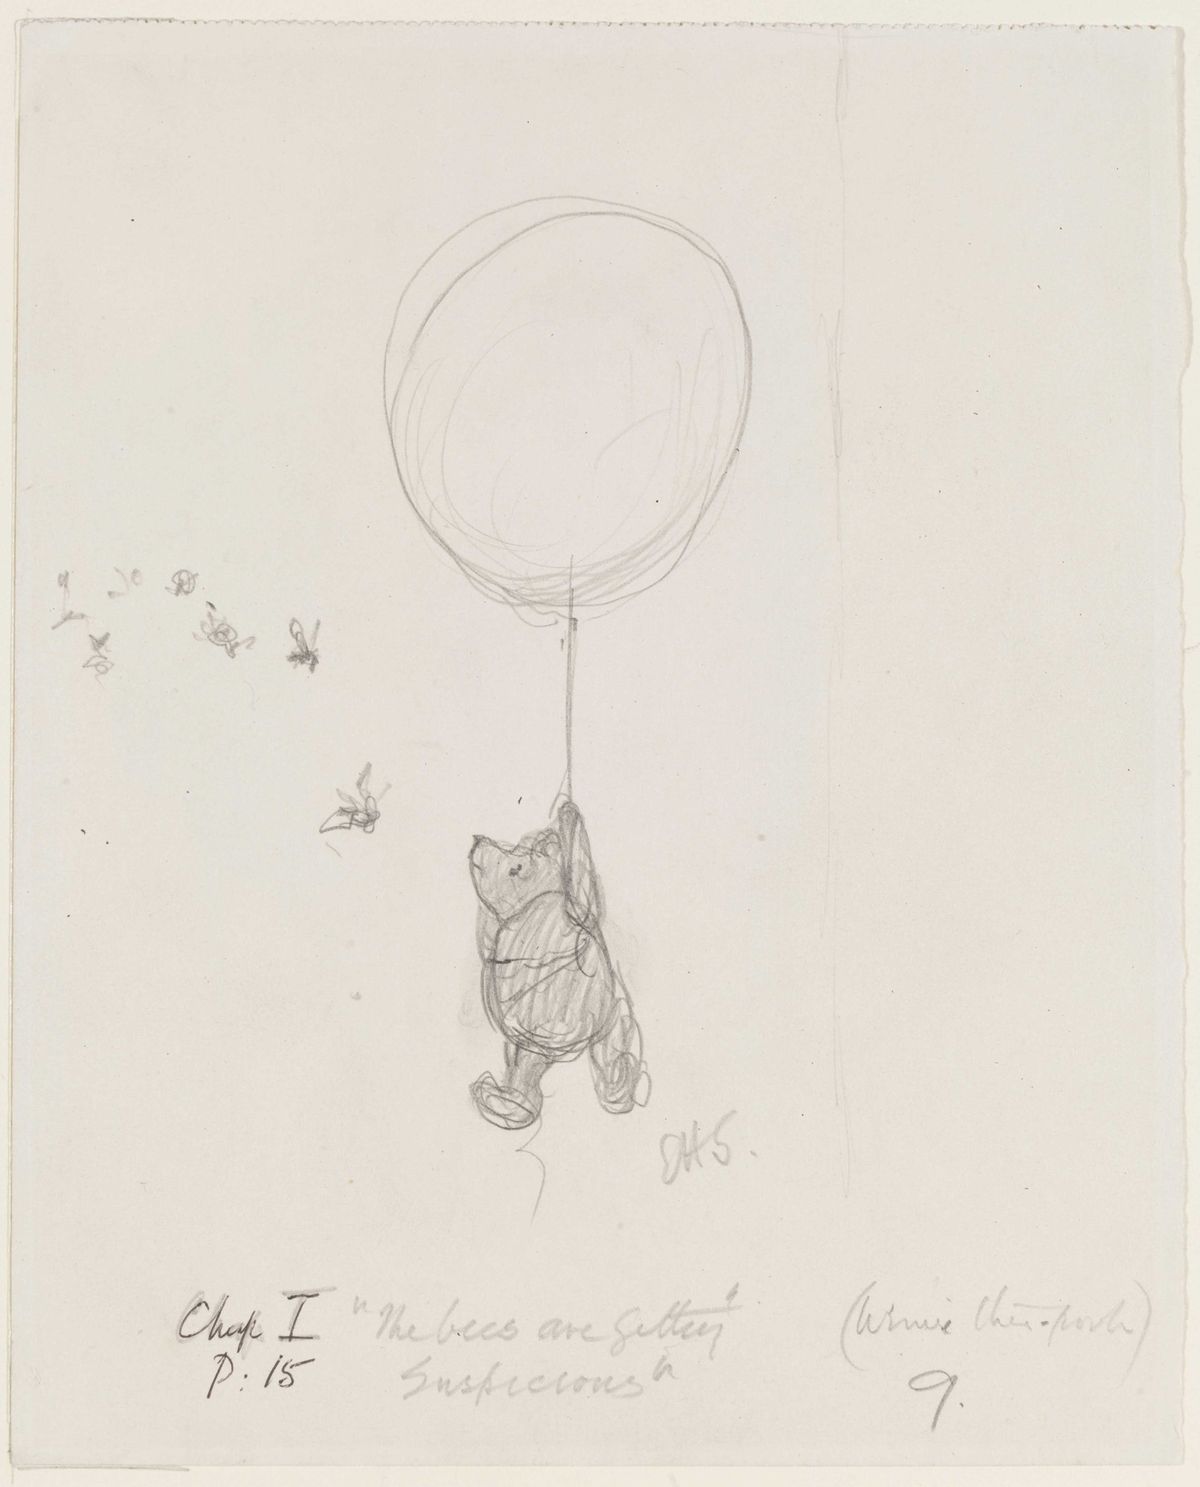 The Bees are Getting Suspicious, pencil drawing by E. H. Shepard, from Winnie-the-Pooh ©The Shepard Trust, reproduced with permission from Curtis Brown